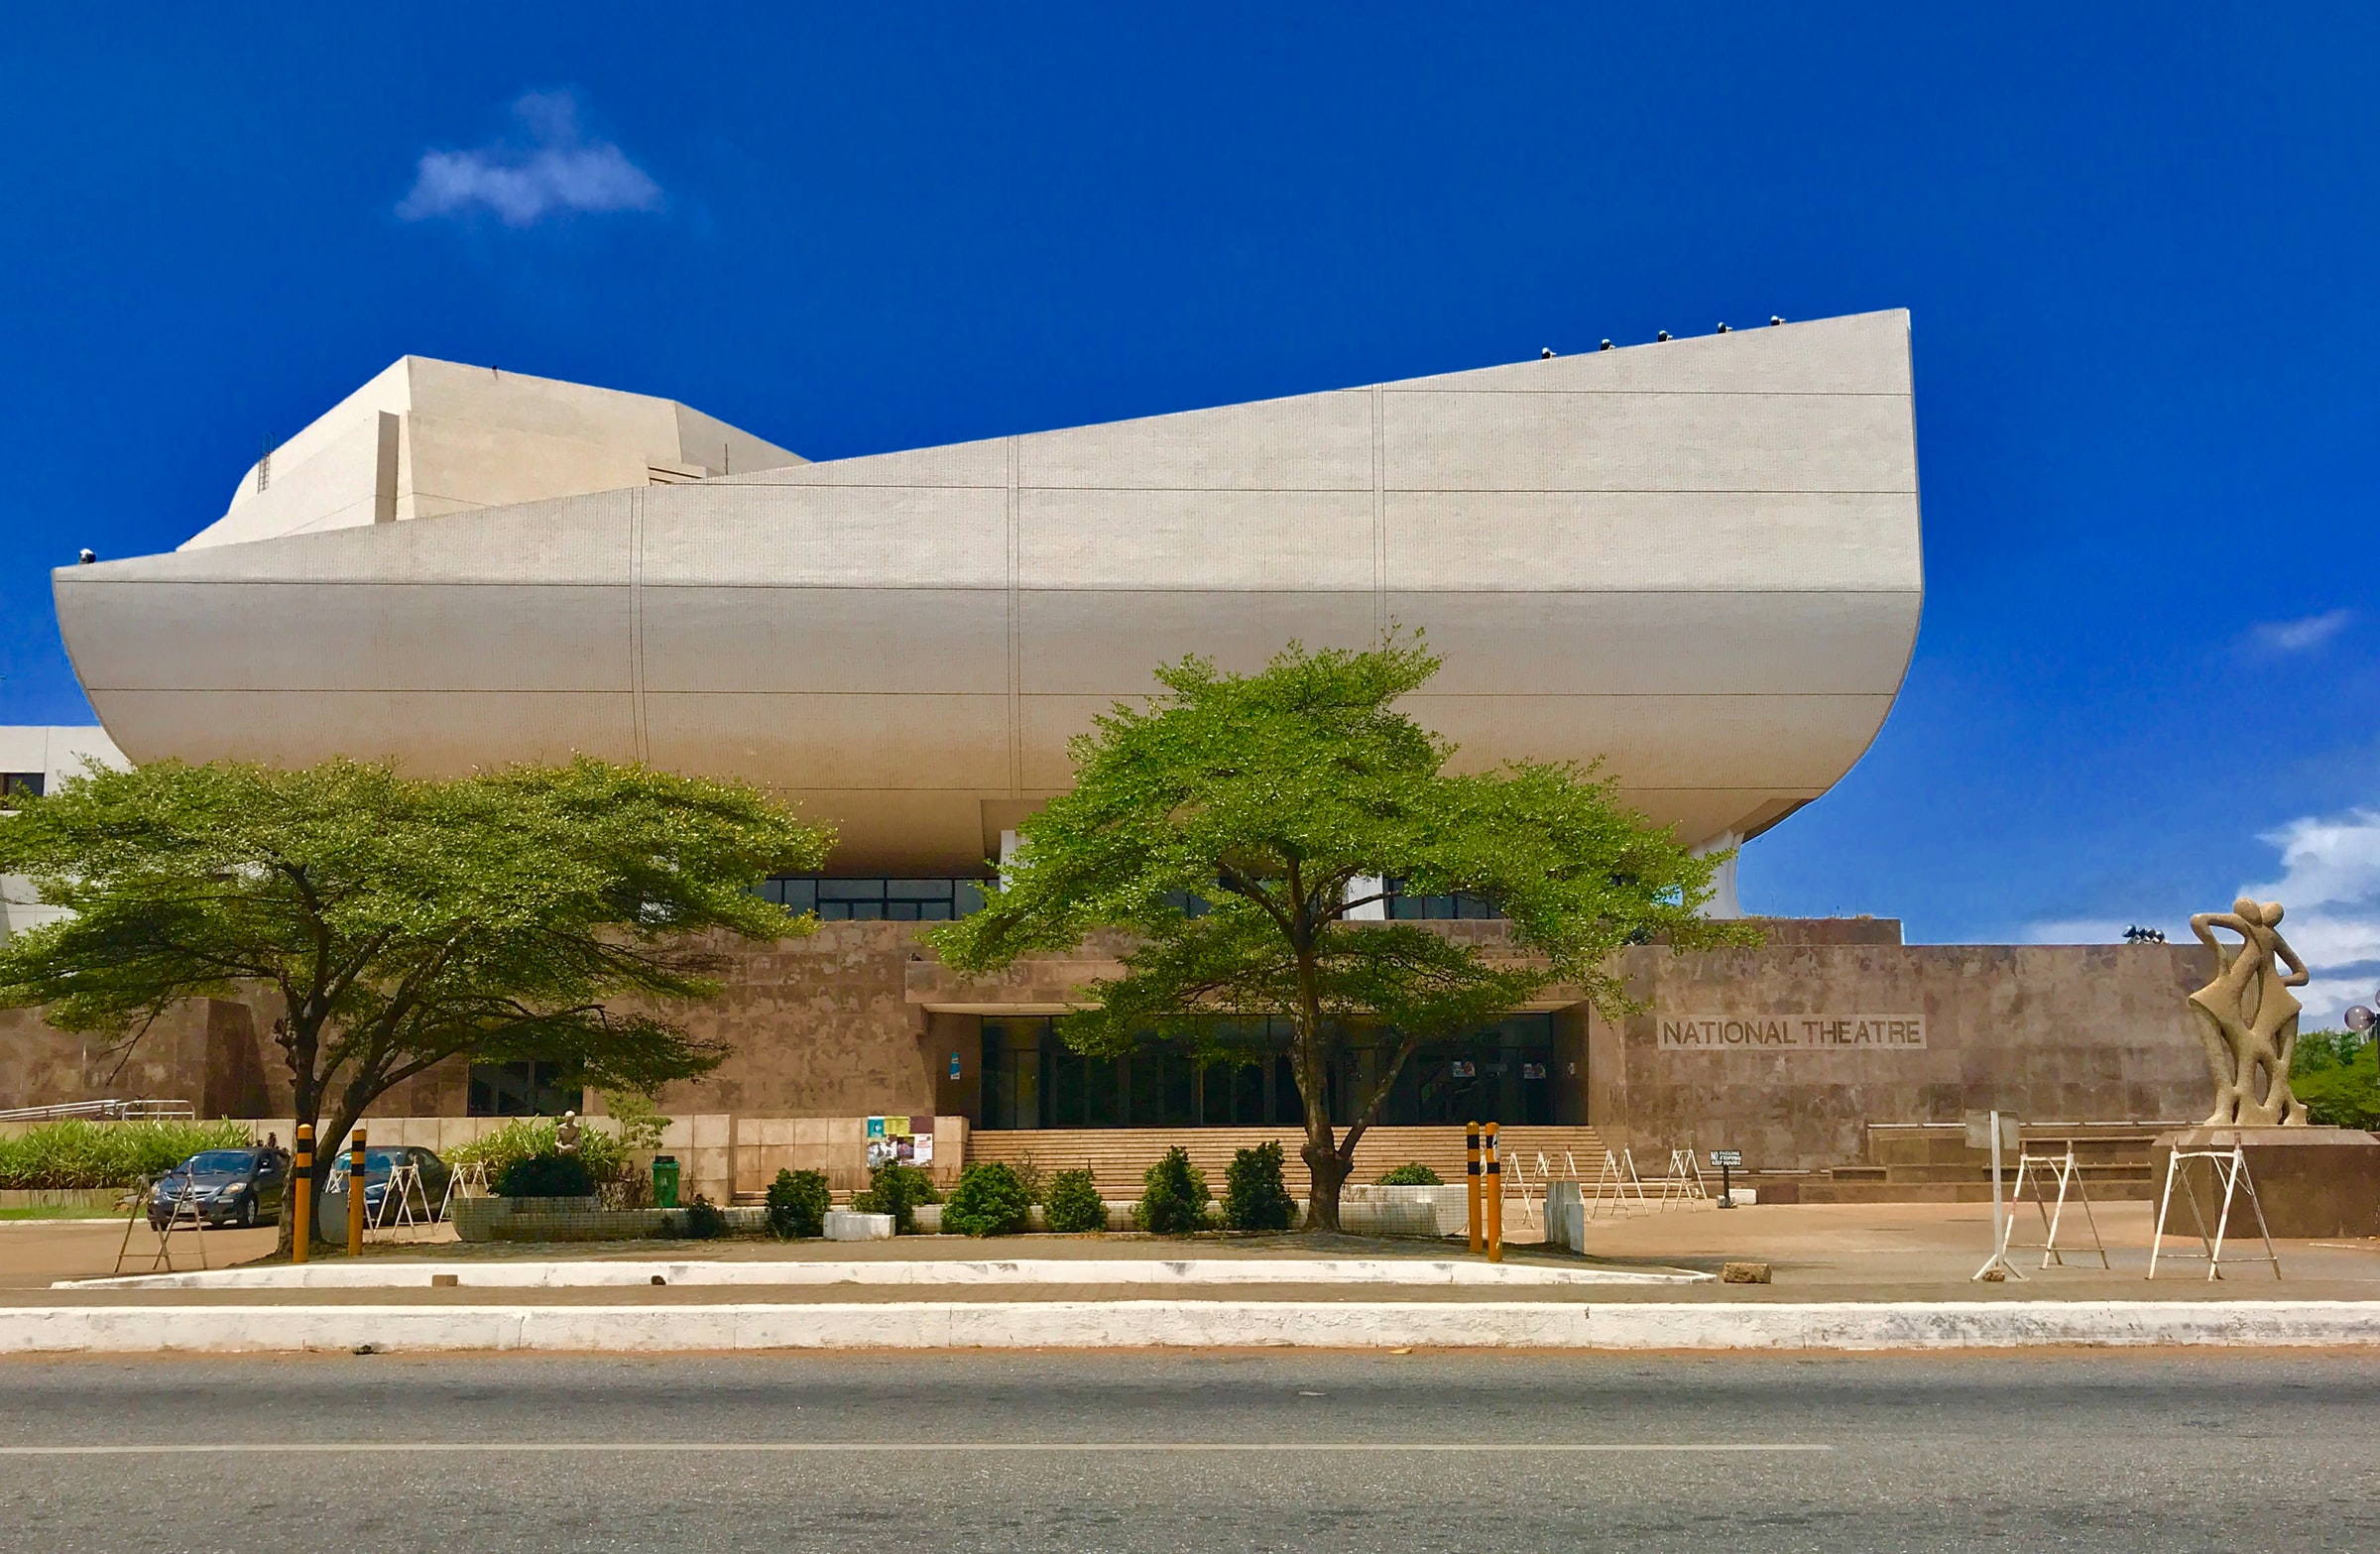 National Theatre Accra Ghana - Best Photo Spots in Accra